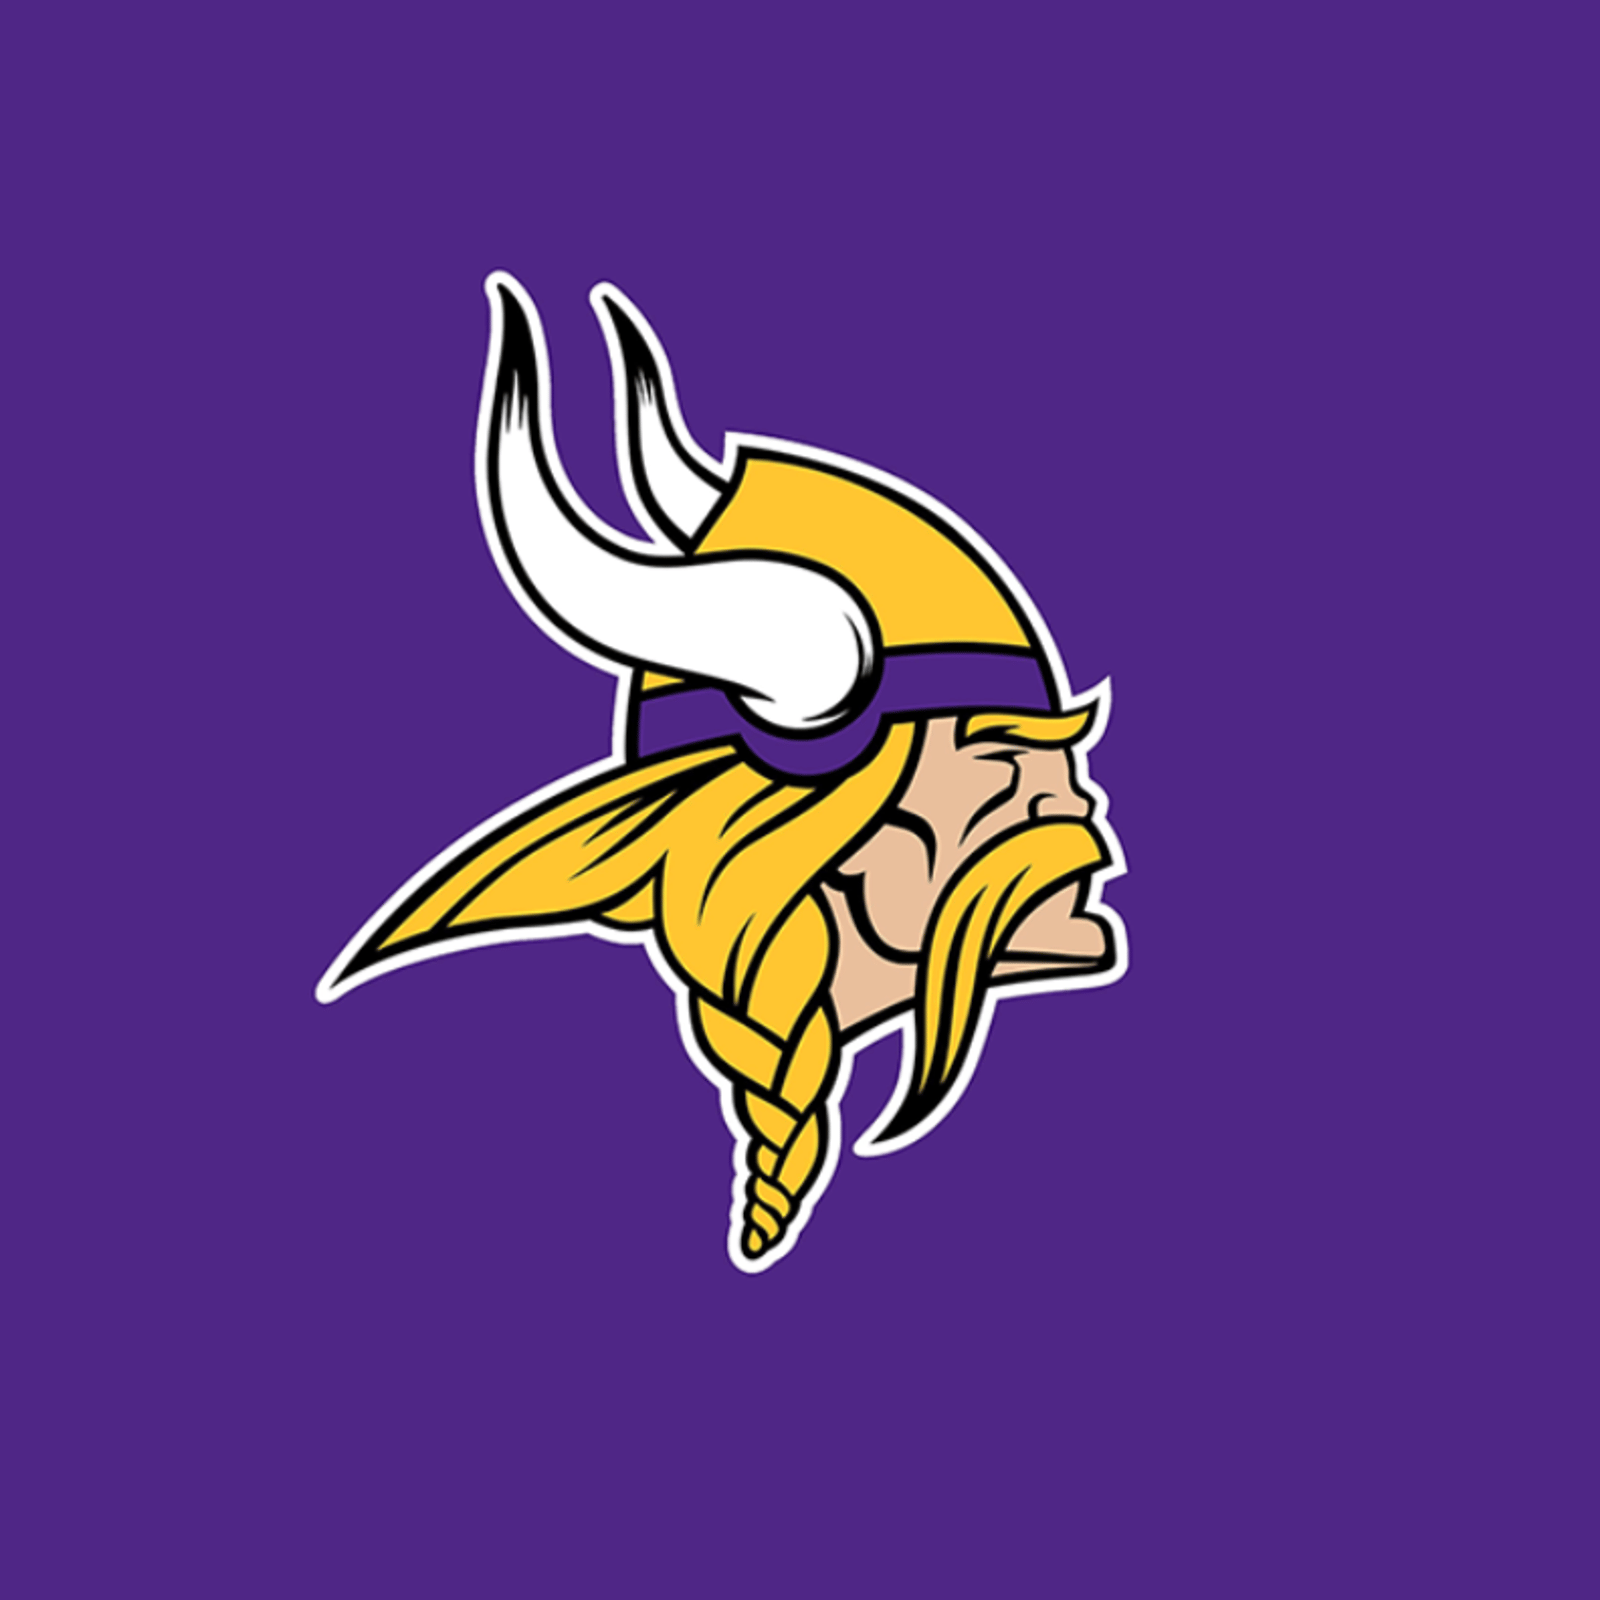 Vikings rookie killed in tragic car accident 